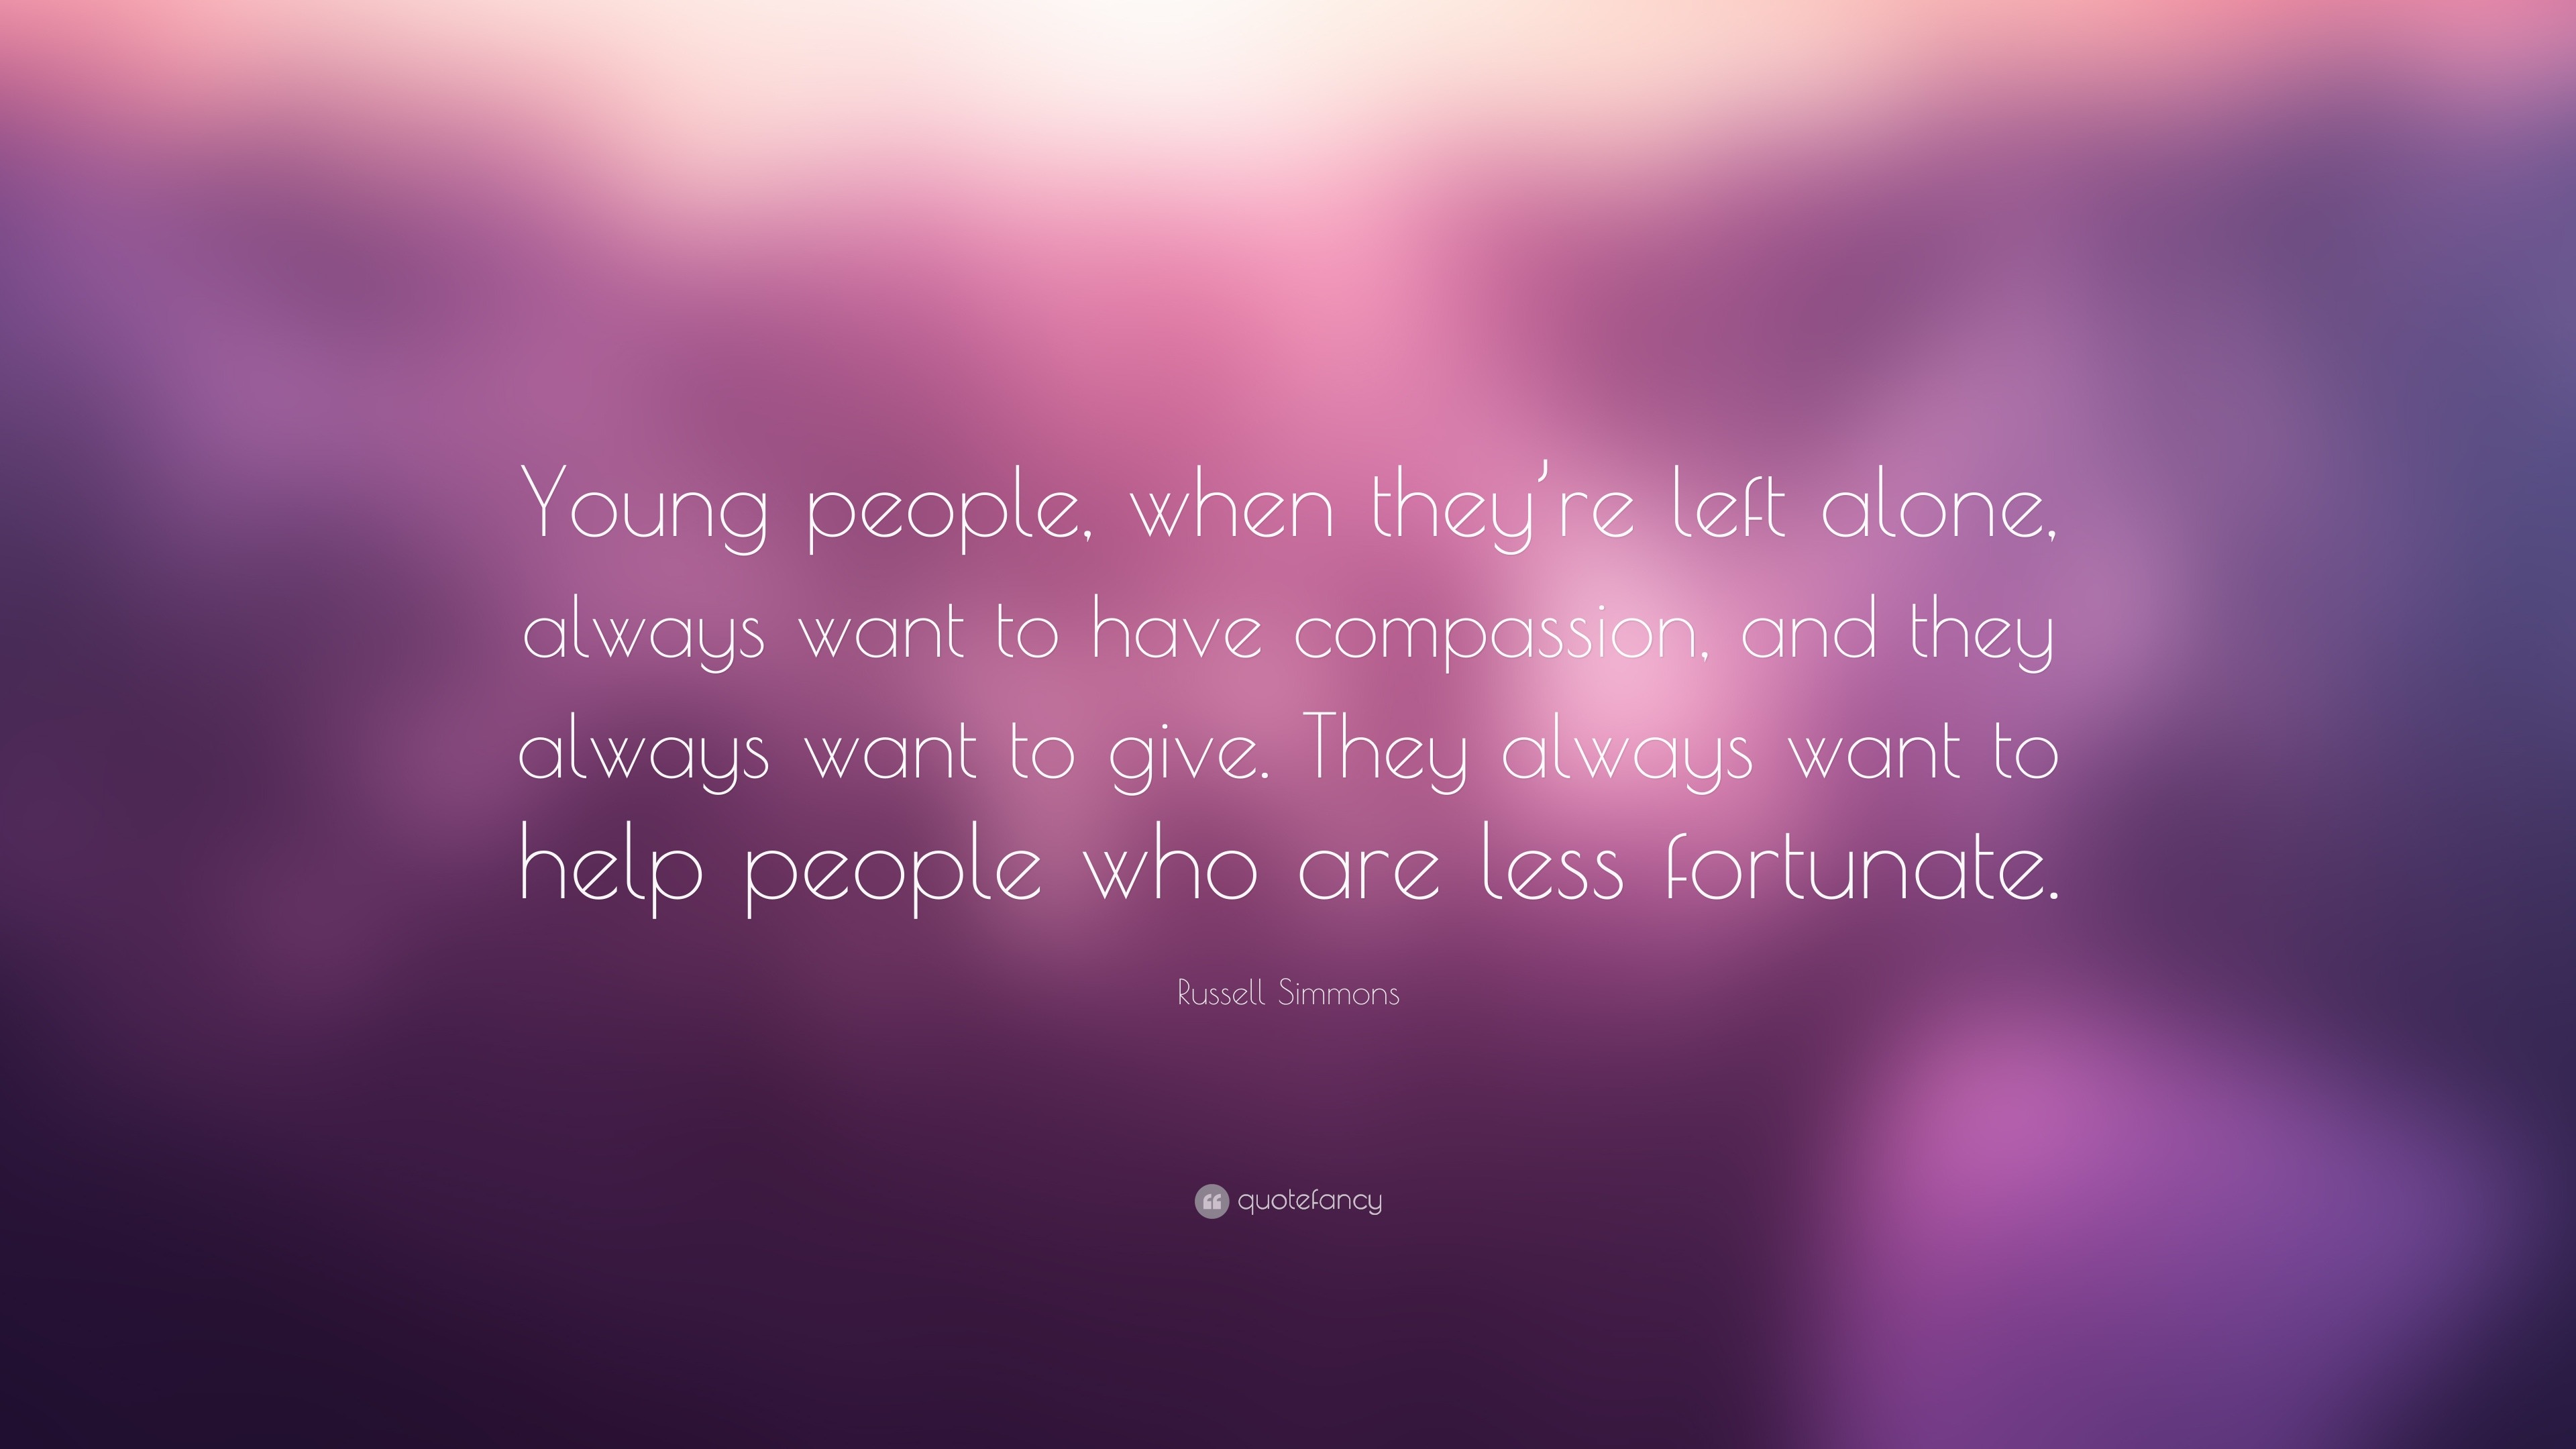 Russell Simmons Quote: “Young people, when they’re left alone, always ...